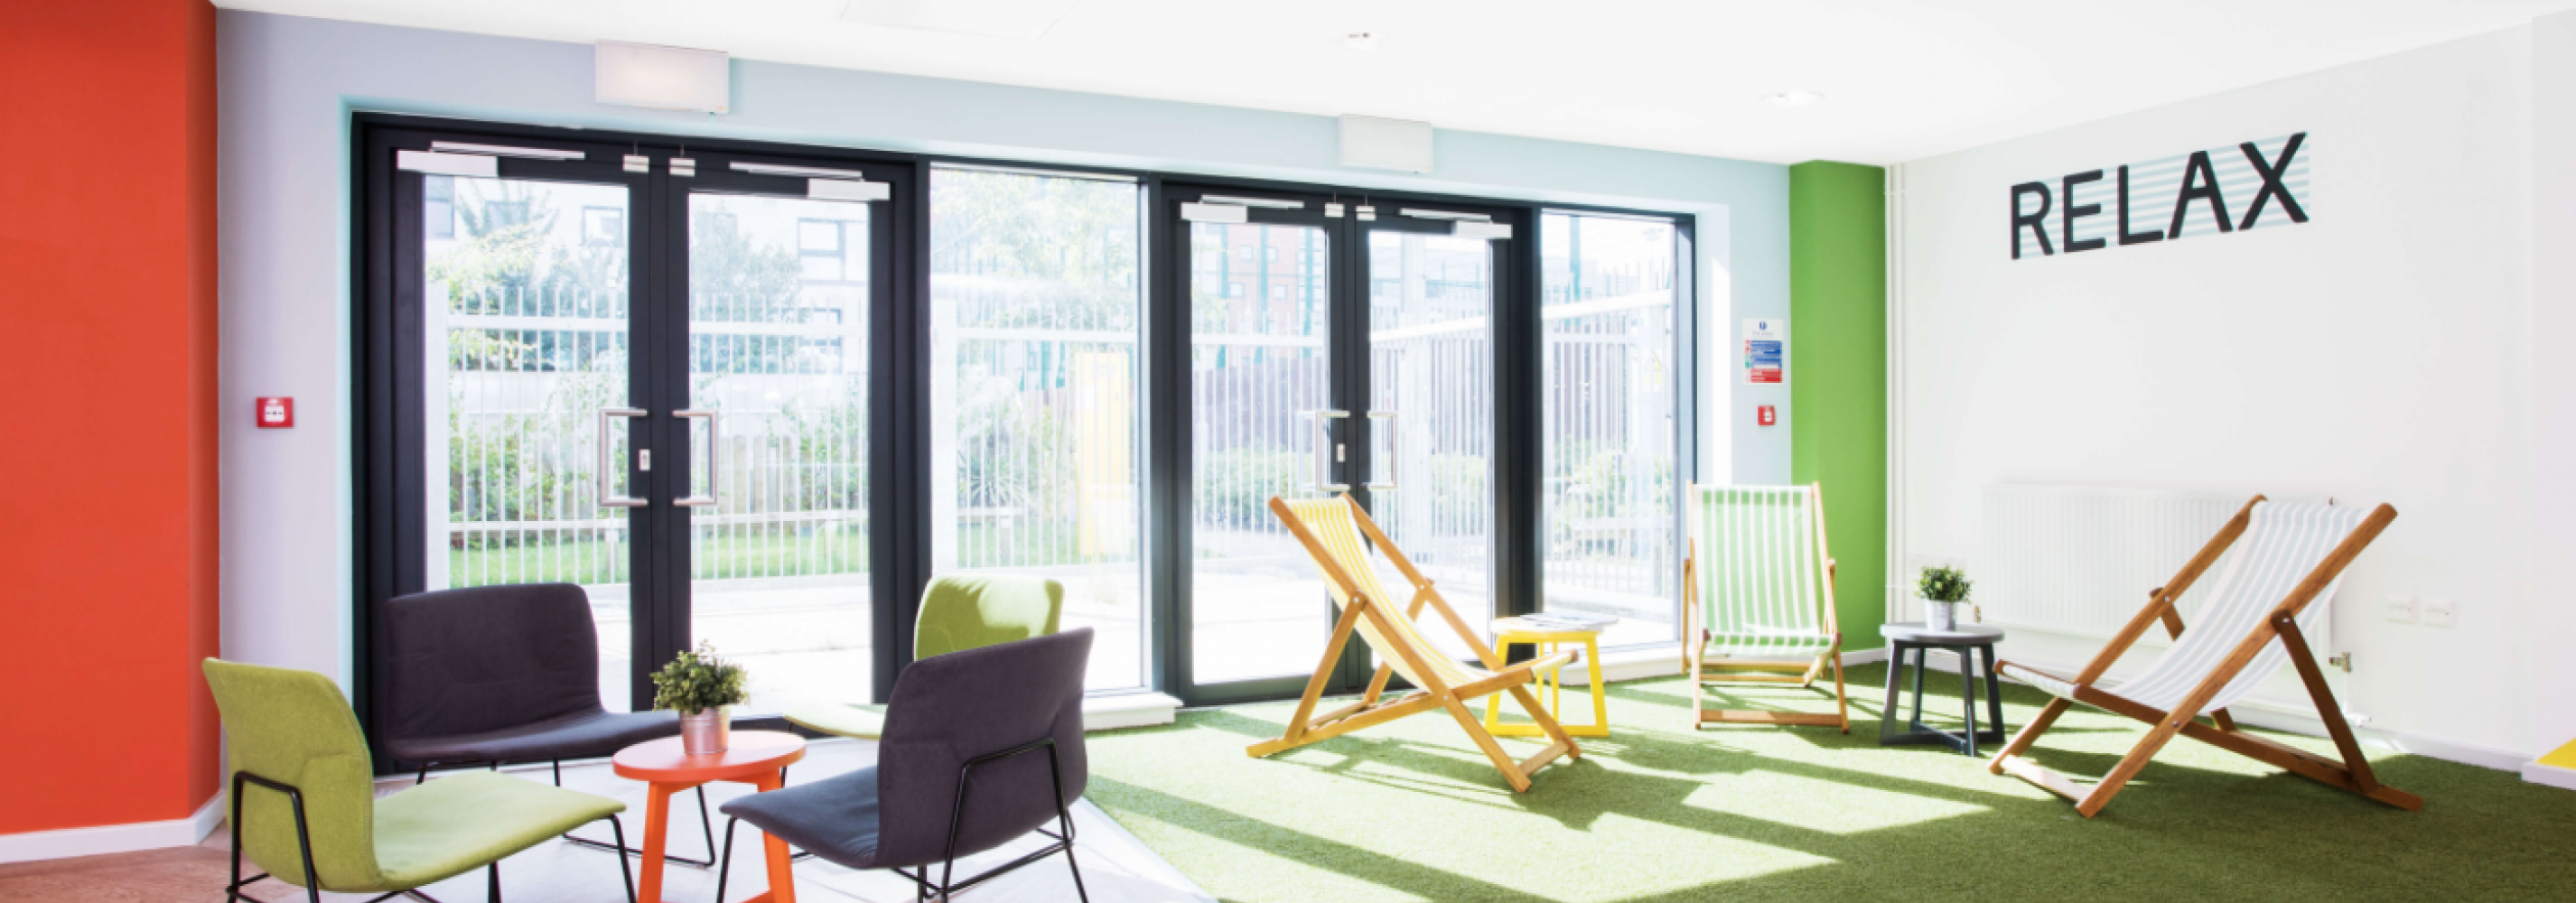 Common room, glass doors, artificial grass, chairs, table